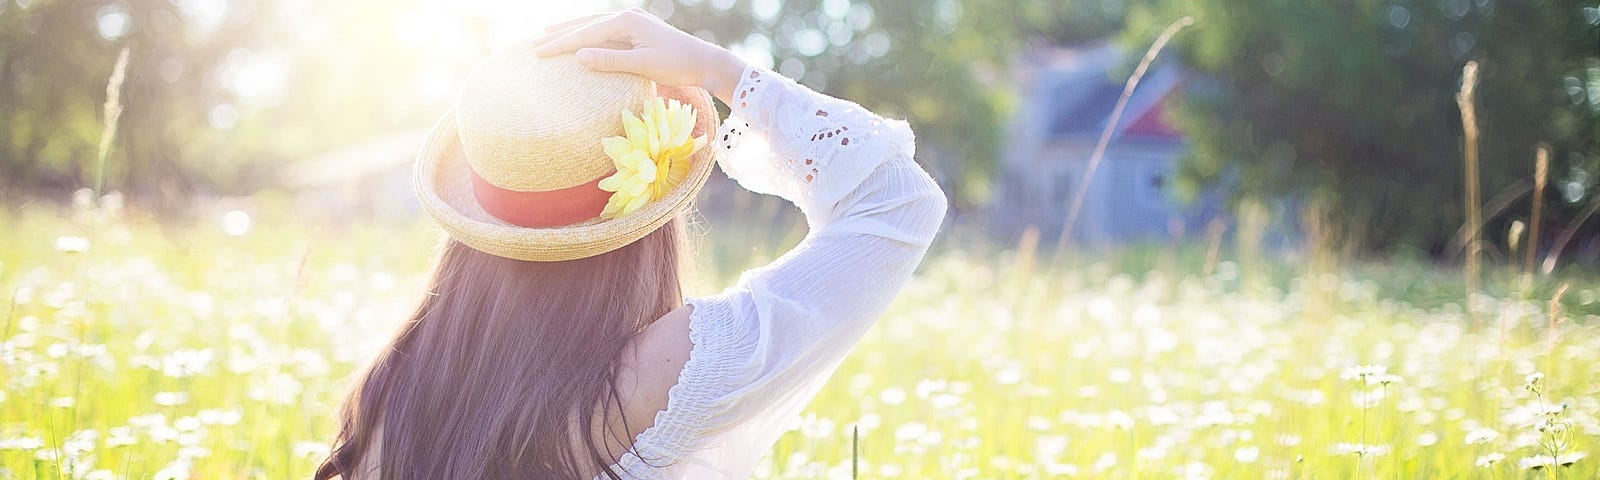 A field of grass and flowers with a person sitting on the ground. The sun shines brightly down on a straw hat with a sunflower on the brim and long brown hair spills out from the hat down the back of a filmy white shirt.